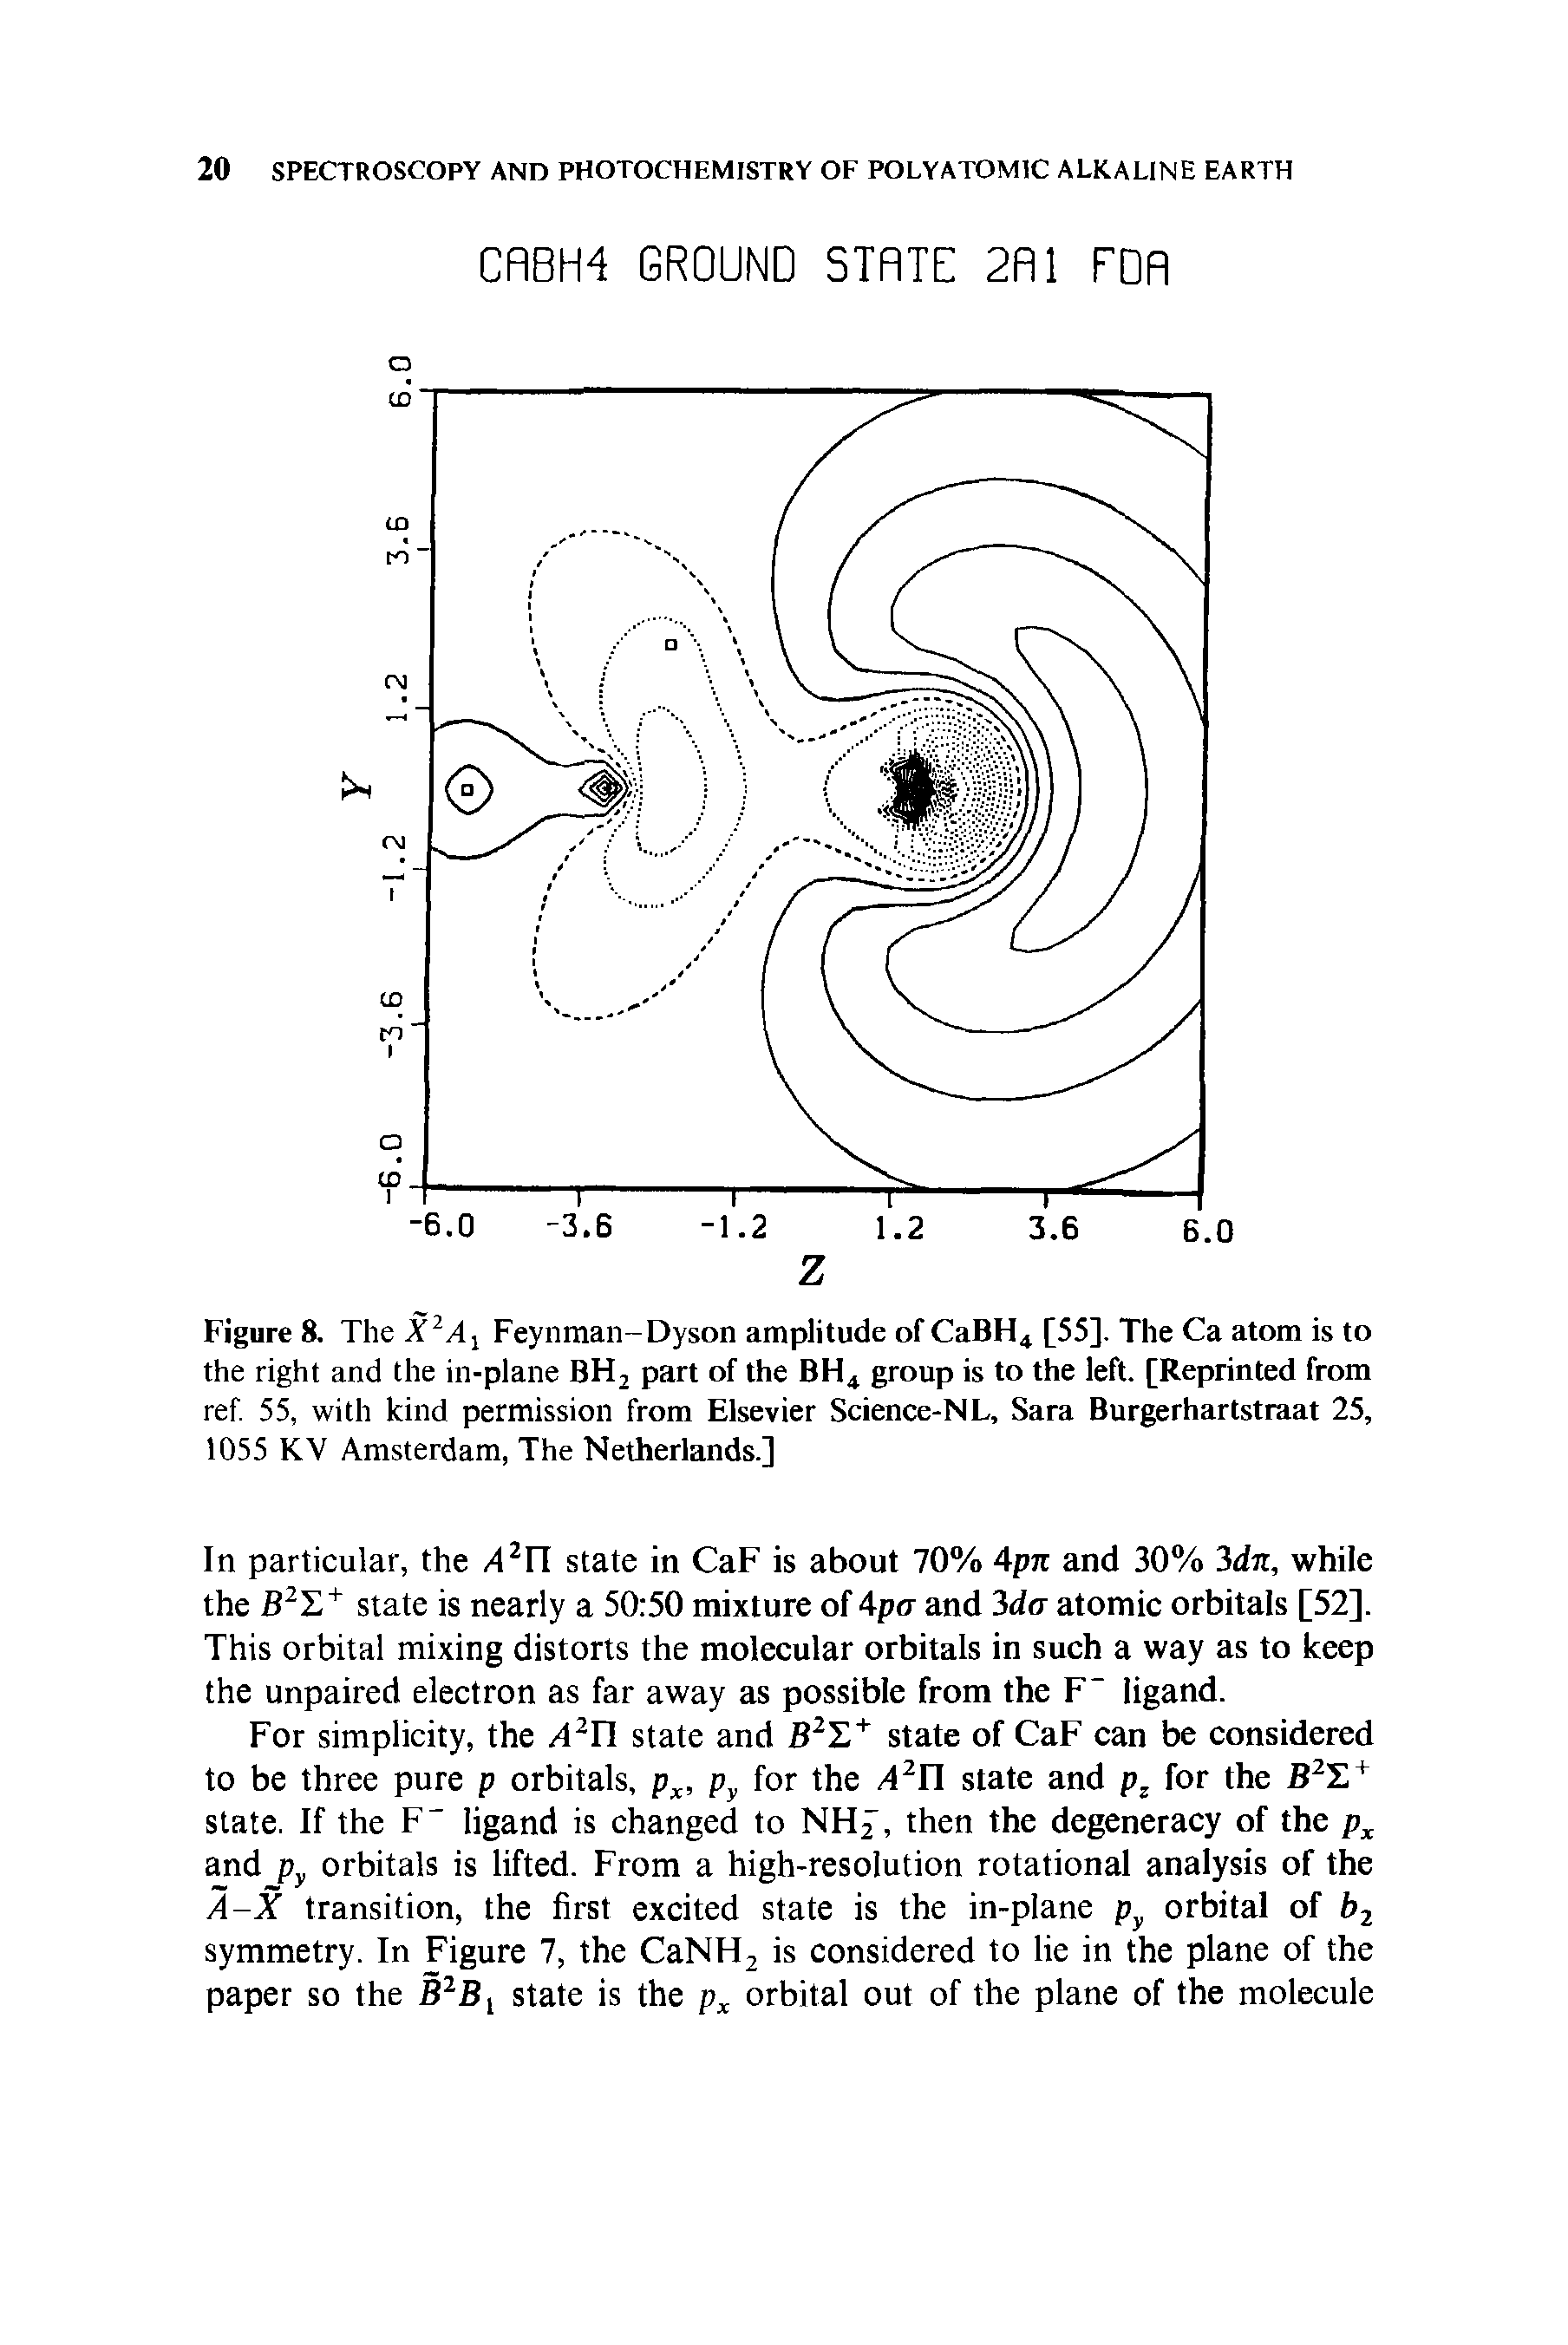 Figure 8. The X2A1 Feynman-Dyson amplitude of CaBH4 [55]. The Ca atom is to the right and the in-plane BH2 part of the BH4 group is to the left. [Reprinted from ref. 55, with kind permission from Elsevier Science-NL, Sara Burgerhartstraat 25, 1055 KV Amsterdam, The Netherlands.]...